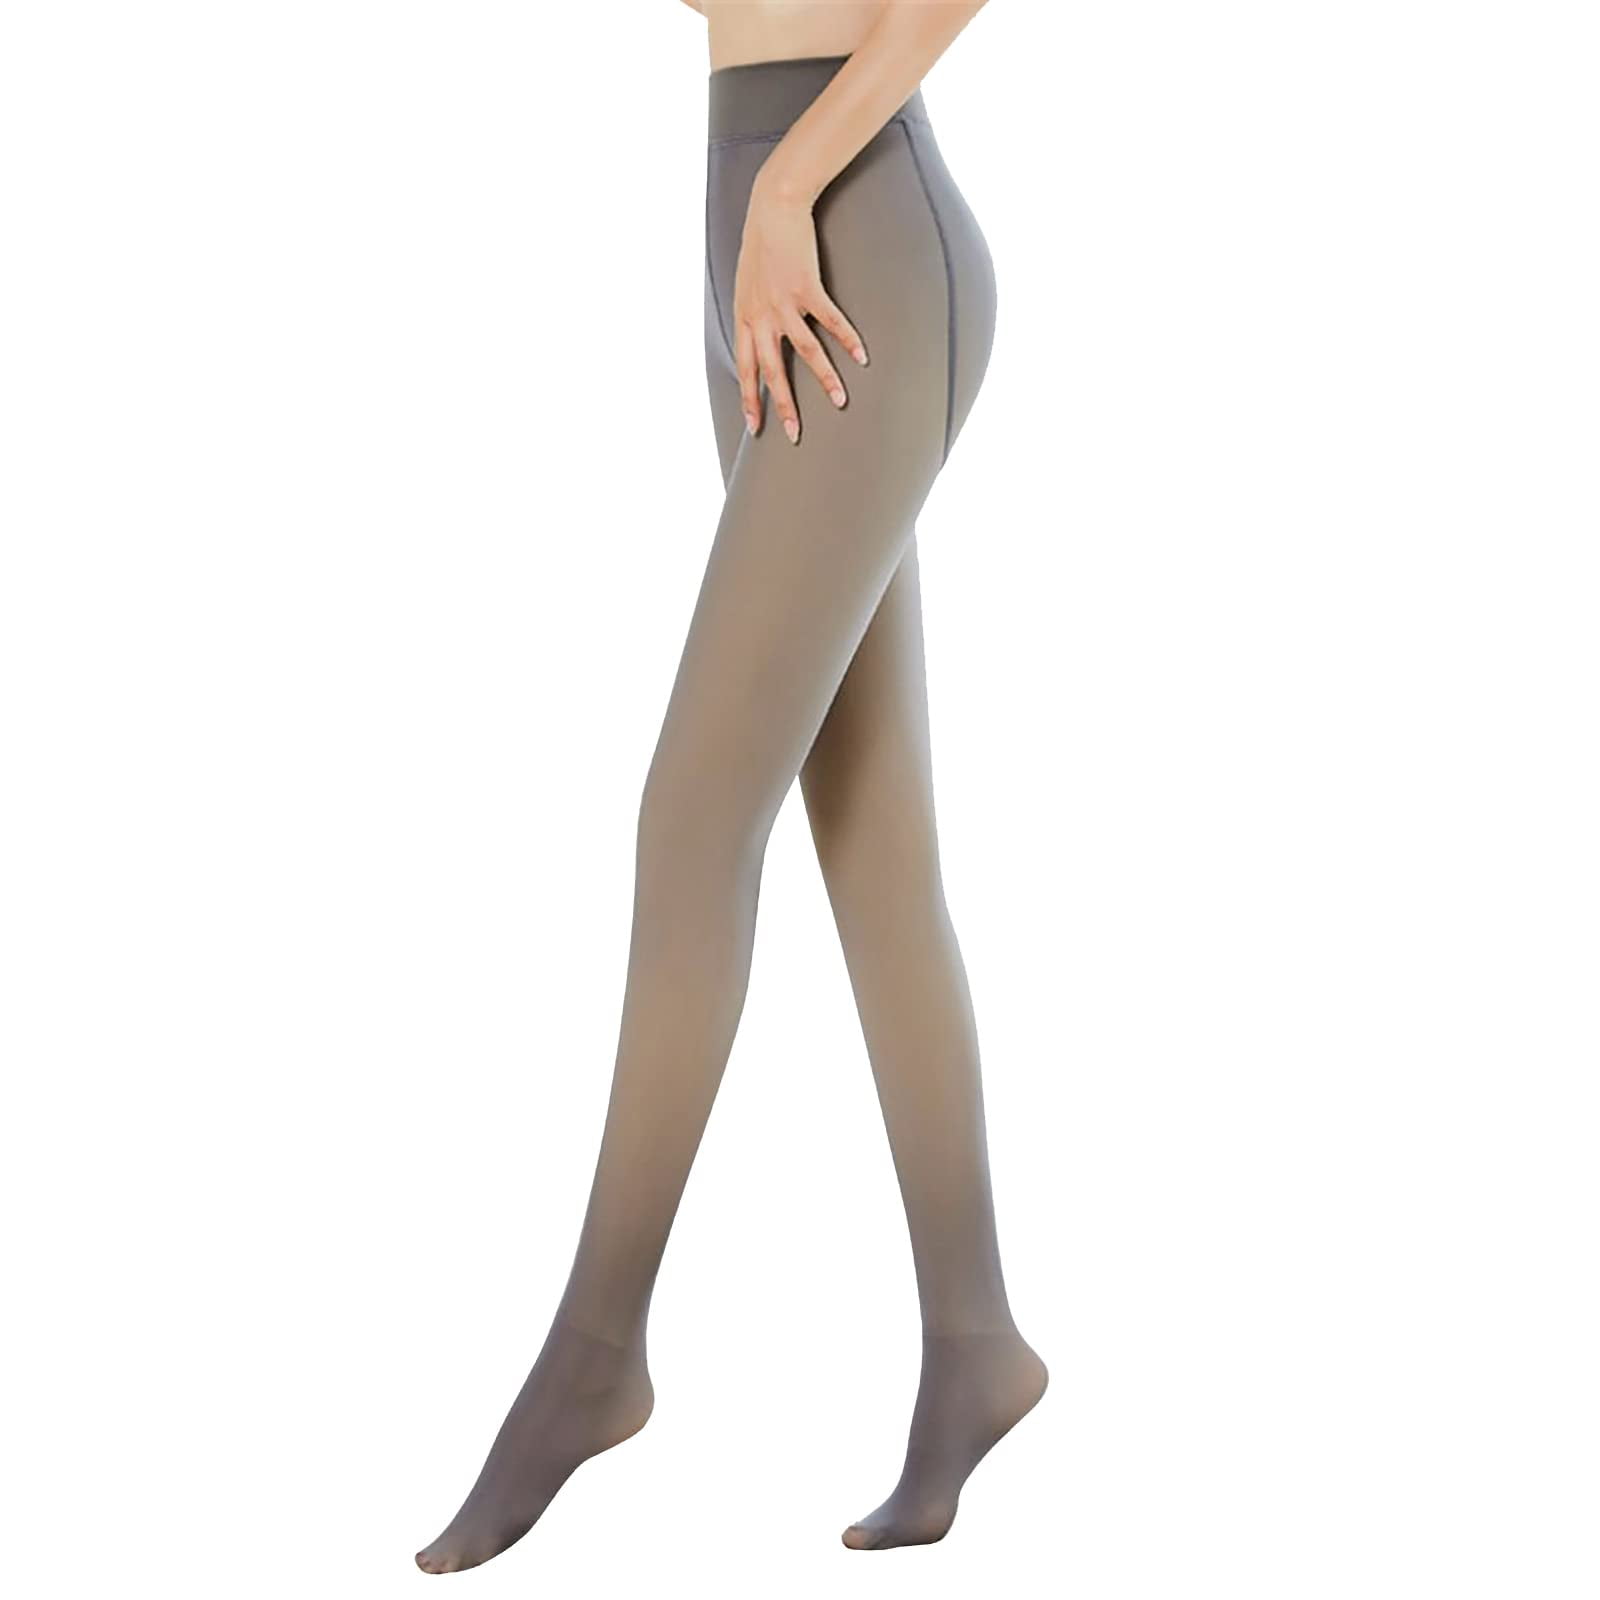 Fleece Lined Tights Women Sheer Fake Translucent Tights Faux Translucent  Winter Thermal Warm High Waisted Leggings 